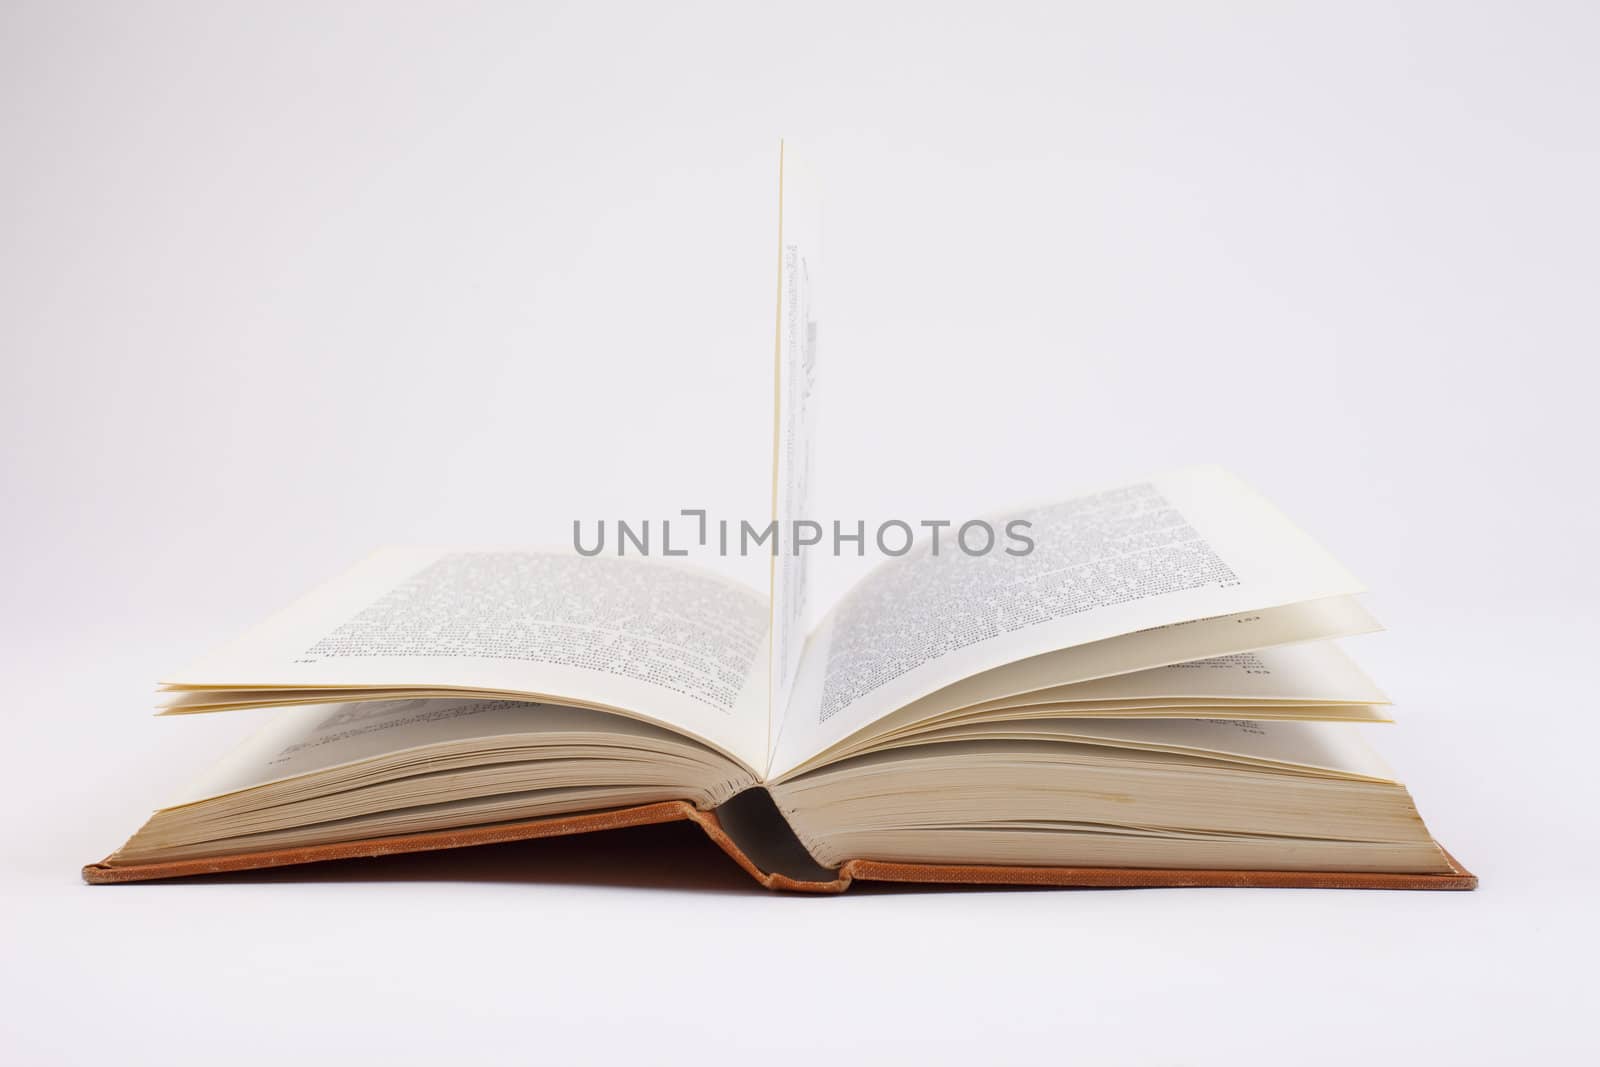 An open book on a white background.